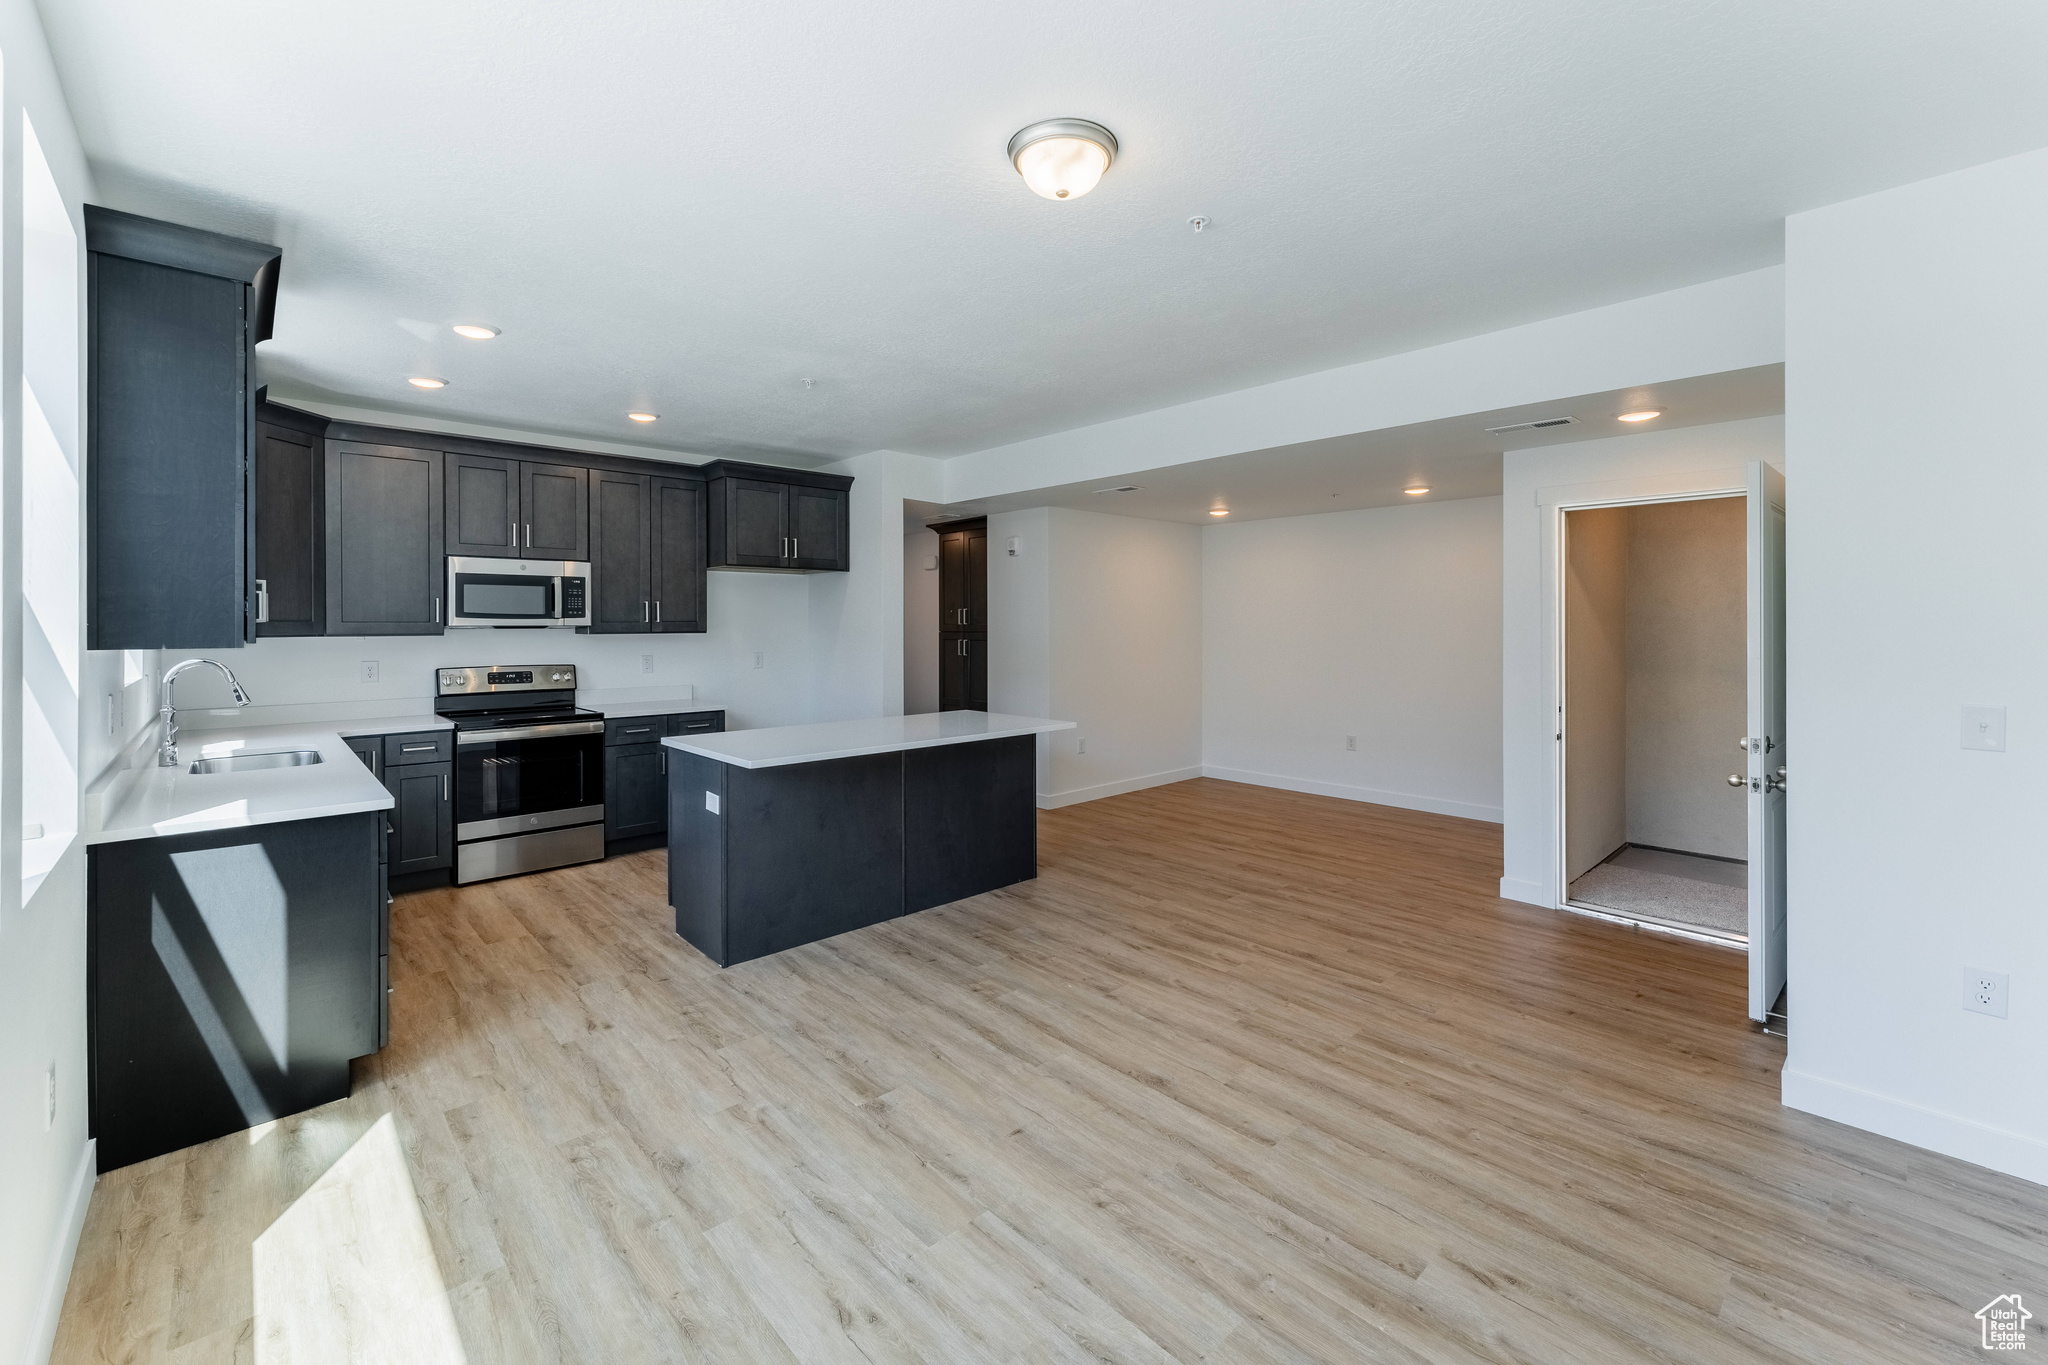 Kitchen with a center island, light hardwood / wood-style flooring, stainless steel appliances, and sink